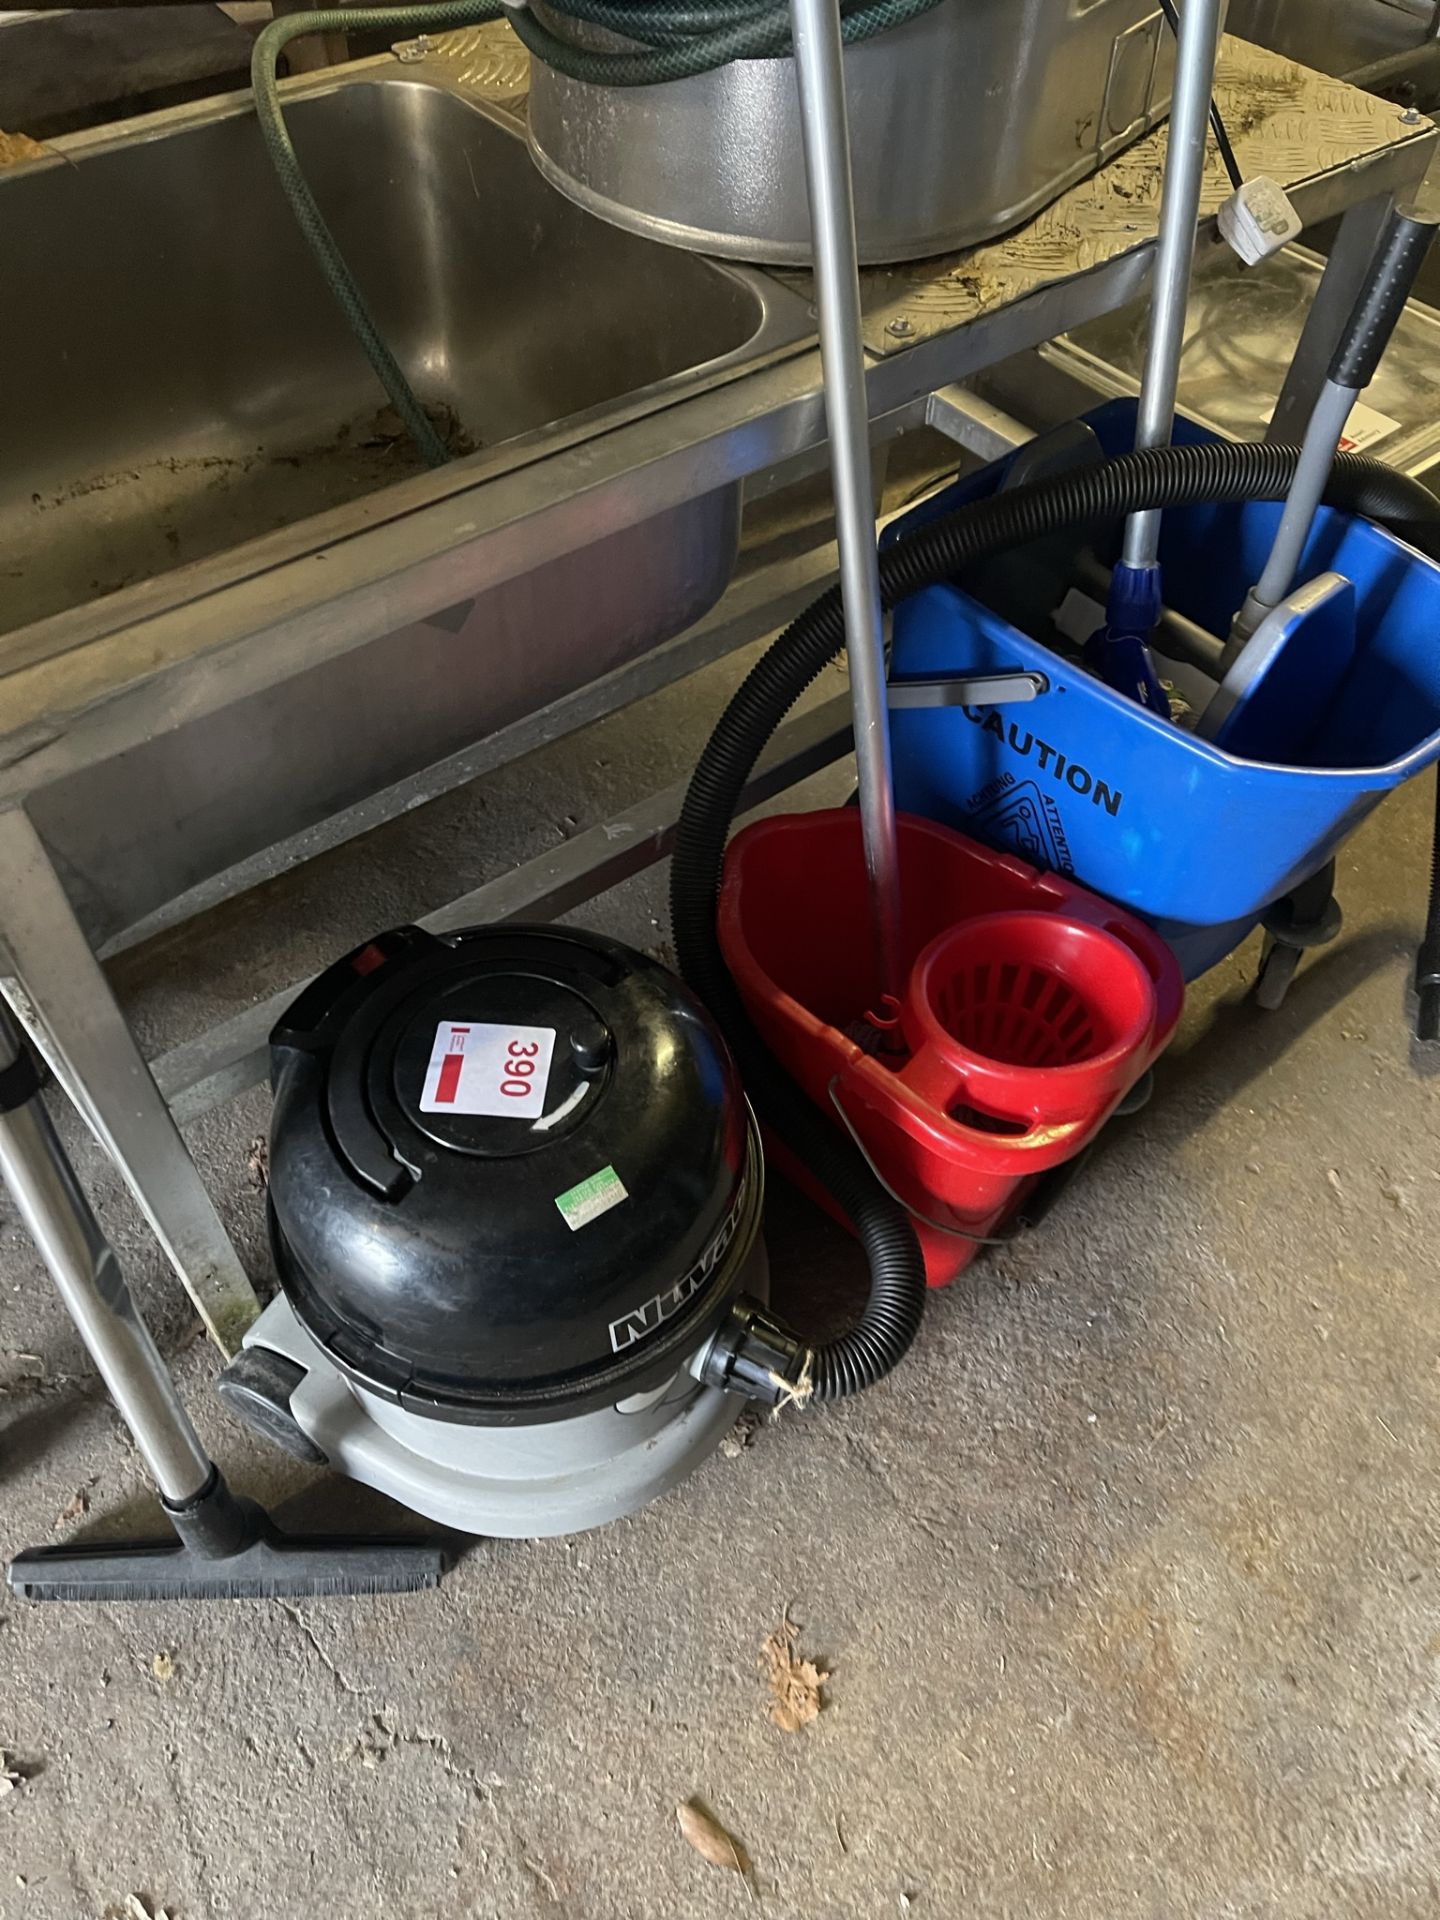 Nuvac hoover and two mop buckets